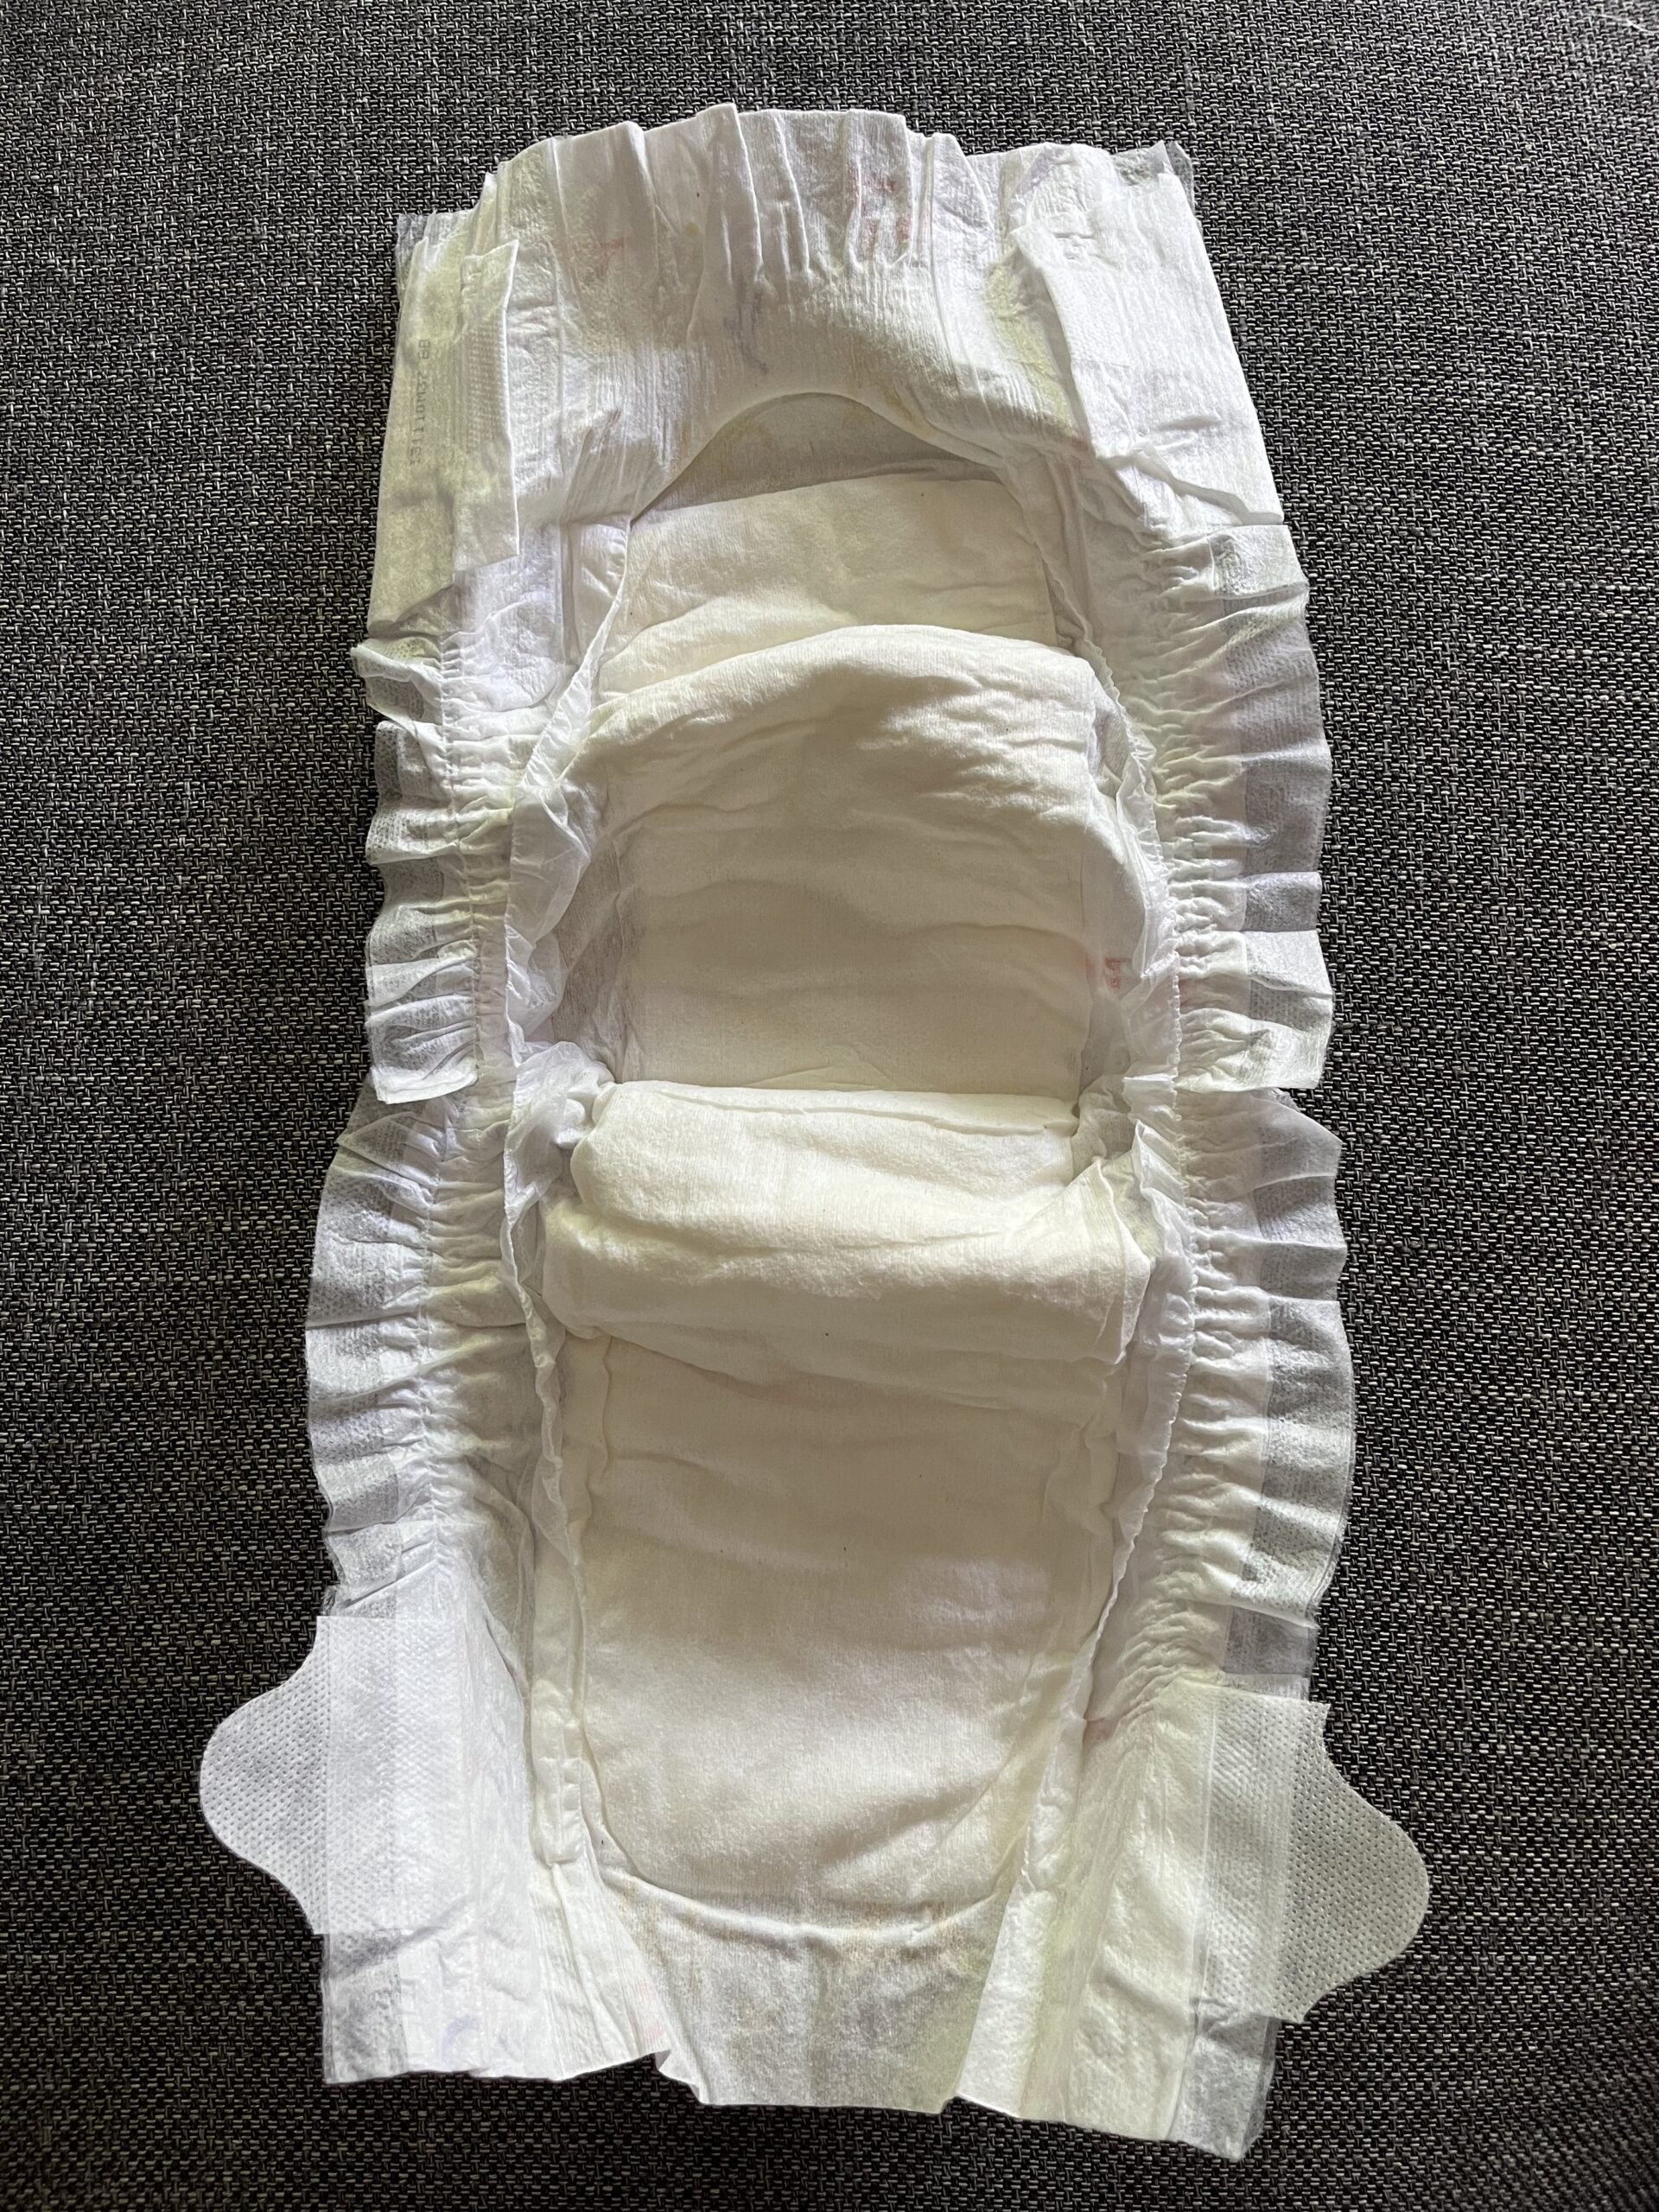 Kudos Diapers Review | The Most Natural And Gentle Diaper